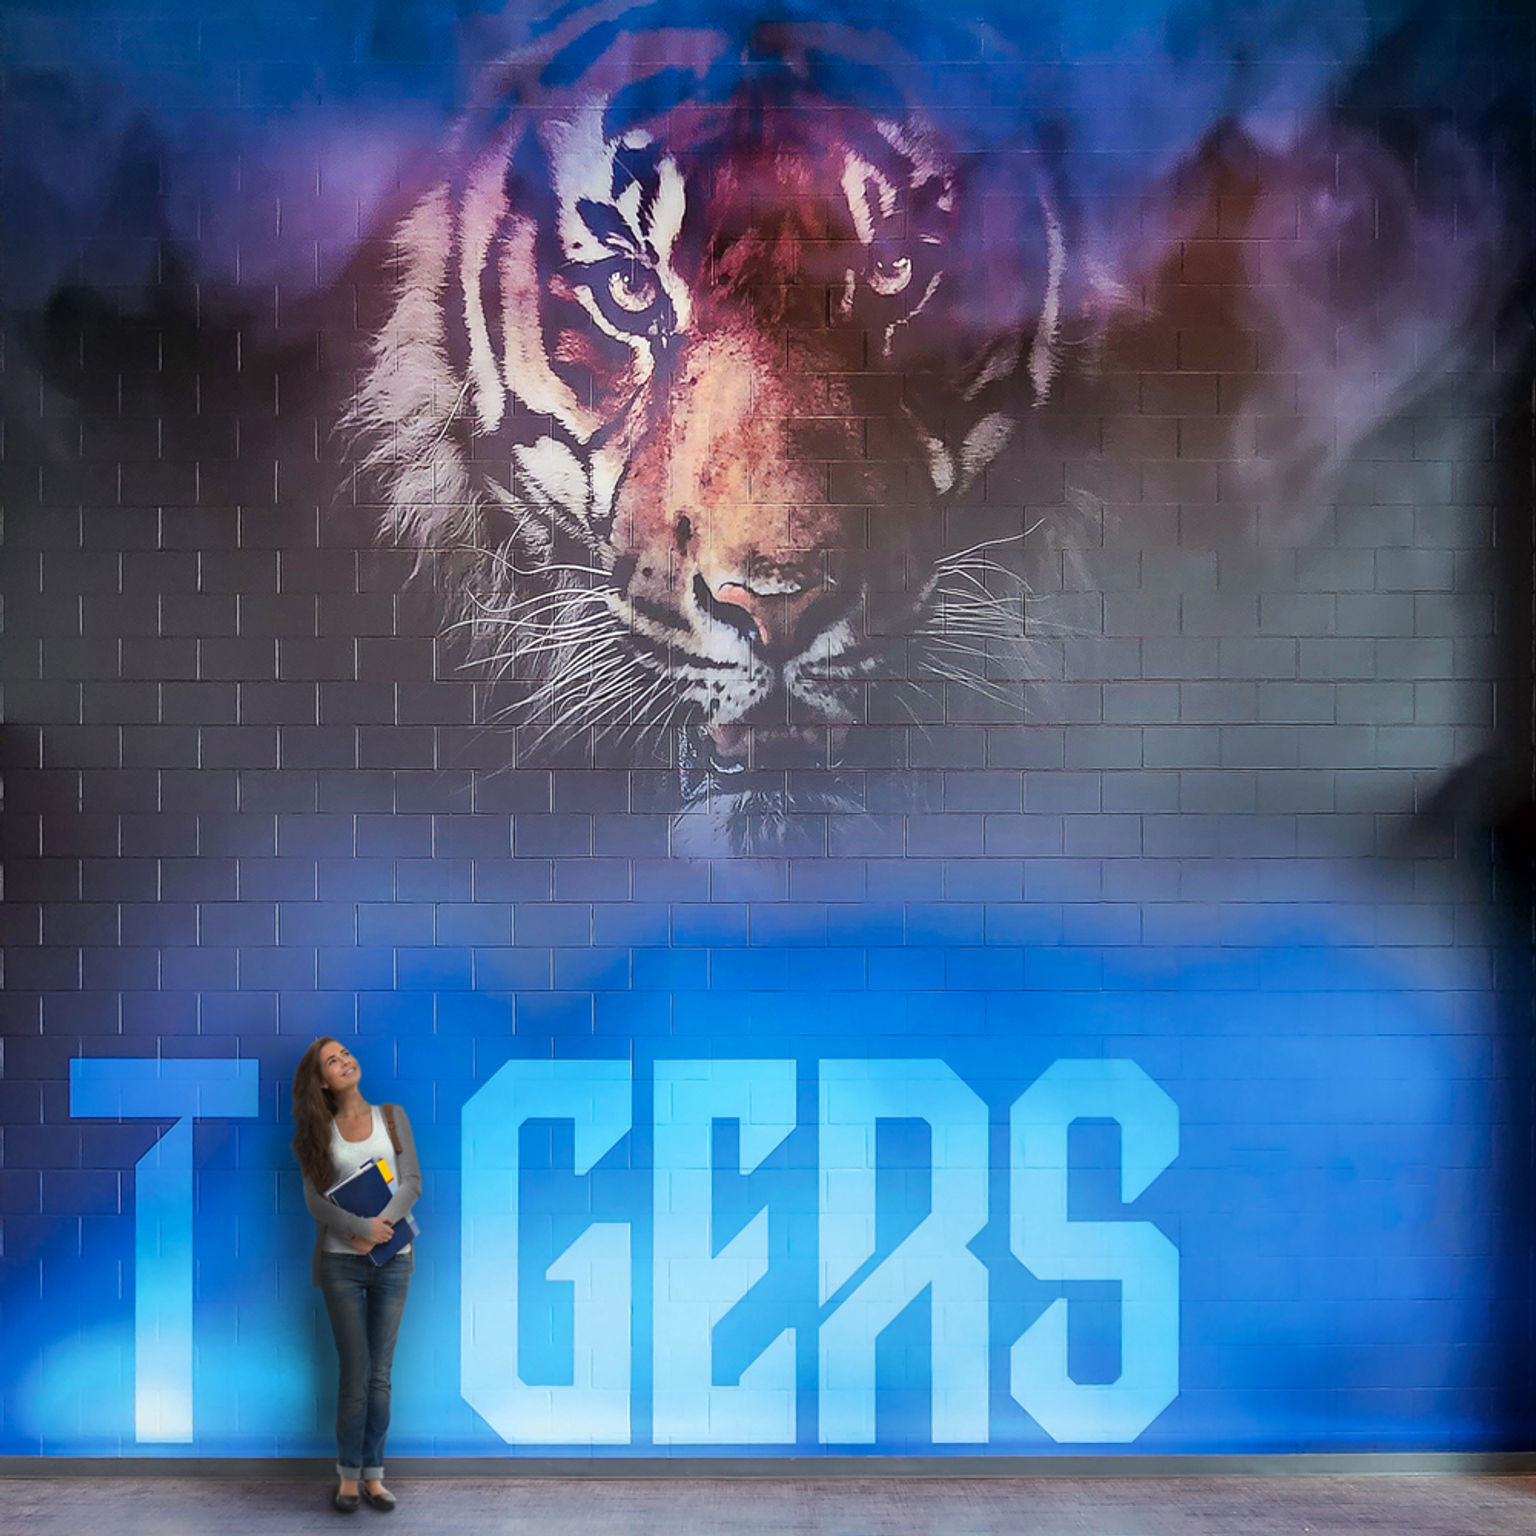 A female student interacting with a multi-story custom past-up wall covering supergraphic on a block wall in a high school featuring a dramatic brand image of a tiger's face.